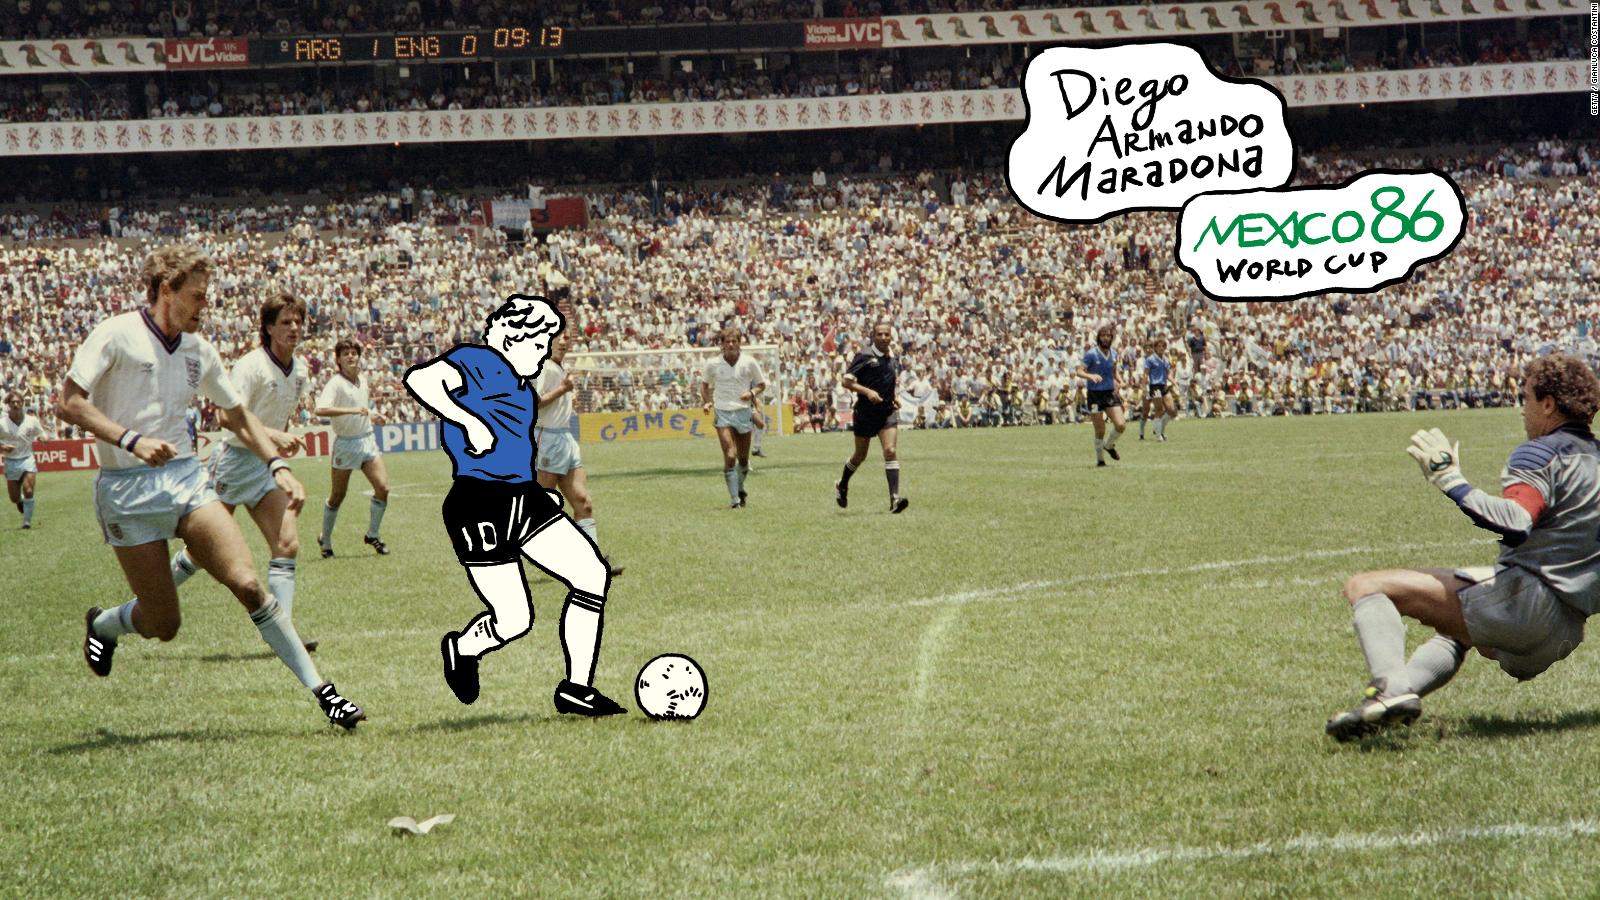 Diego Maradona: 'There's some sort of cry for help going on there, ' says filmmaker